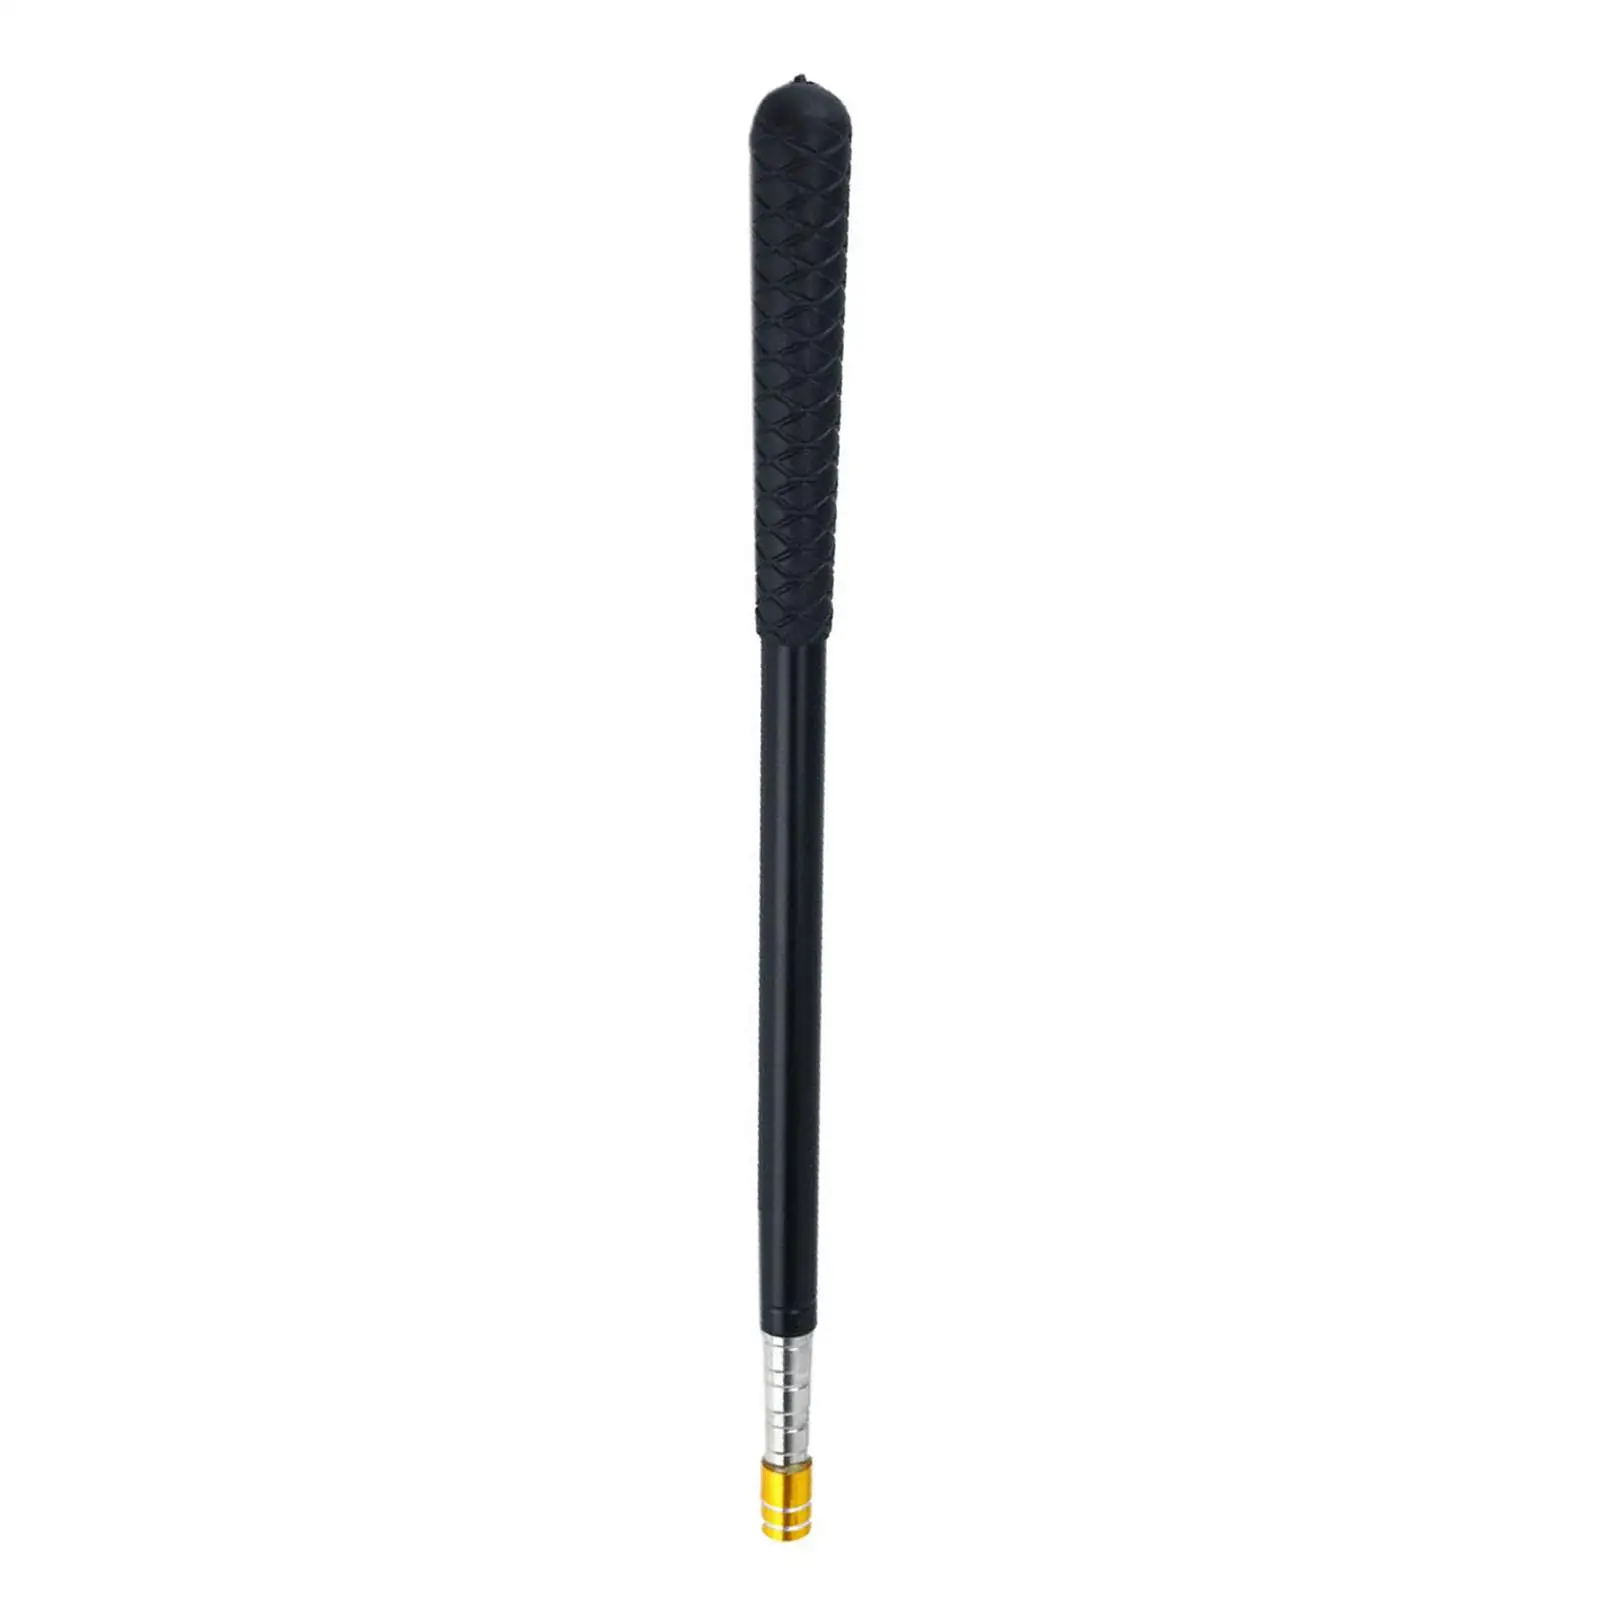 5 Sections Fishing Net Pole Portable Accs with 8mm Thread Connector  Retractable 1.5M Telescoping Landing Net Handle Fishing Rod